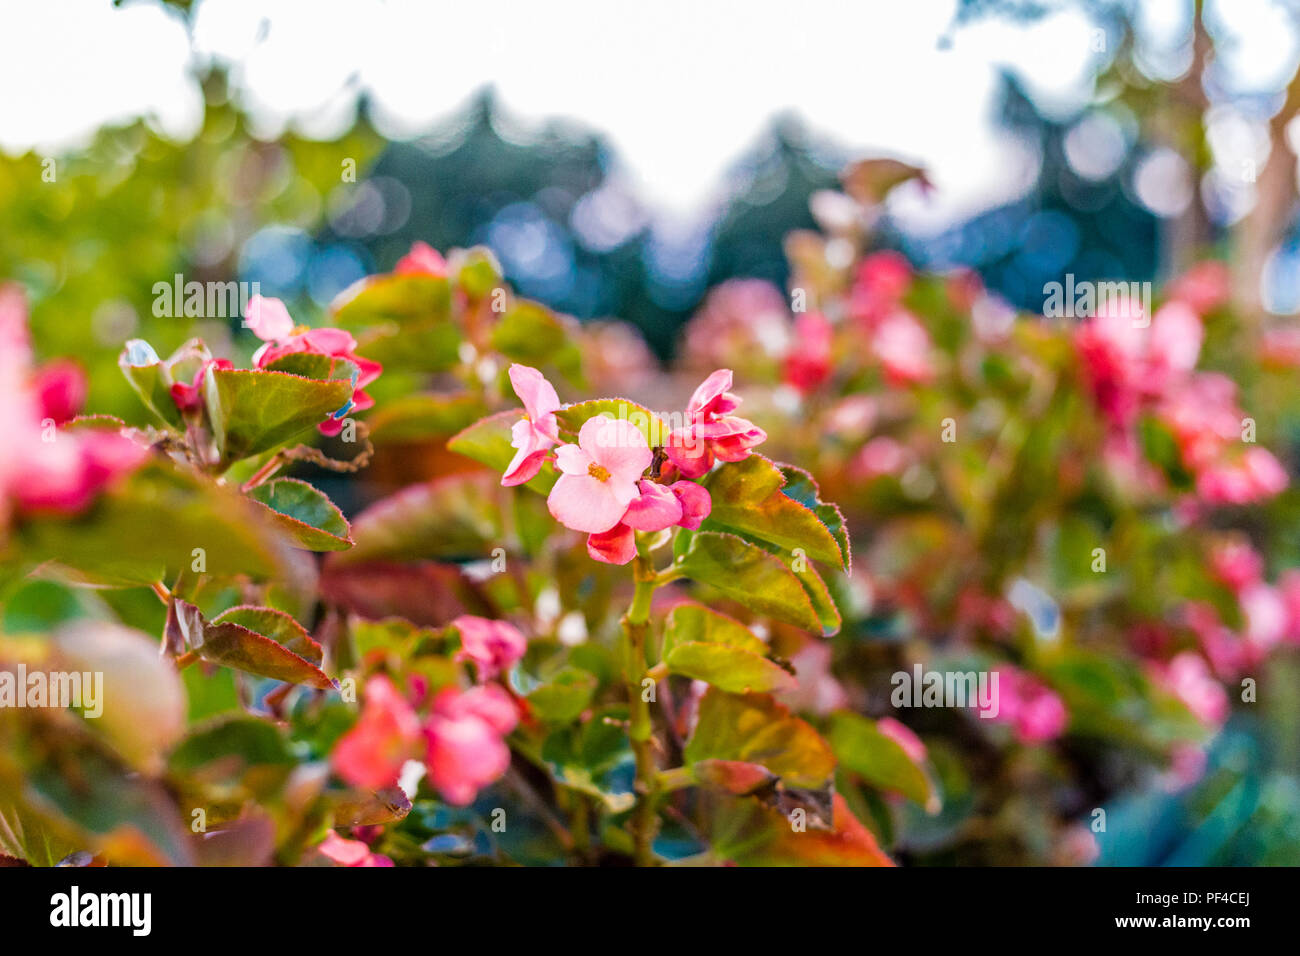 Bush of begonia flowers, succulent plant with green and brown tender leaves, branches and trunk Stock Photo